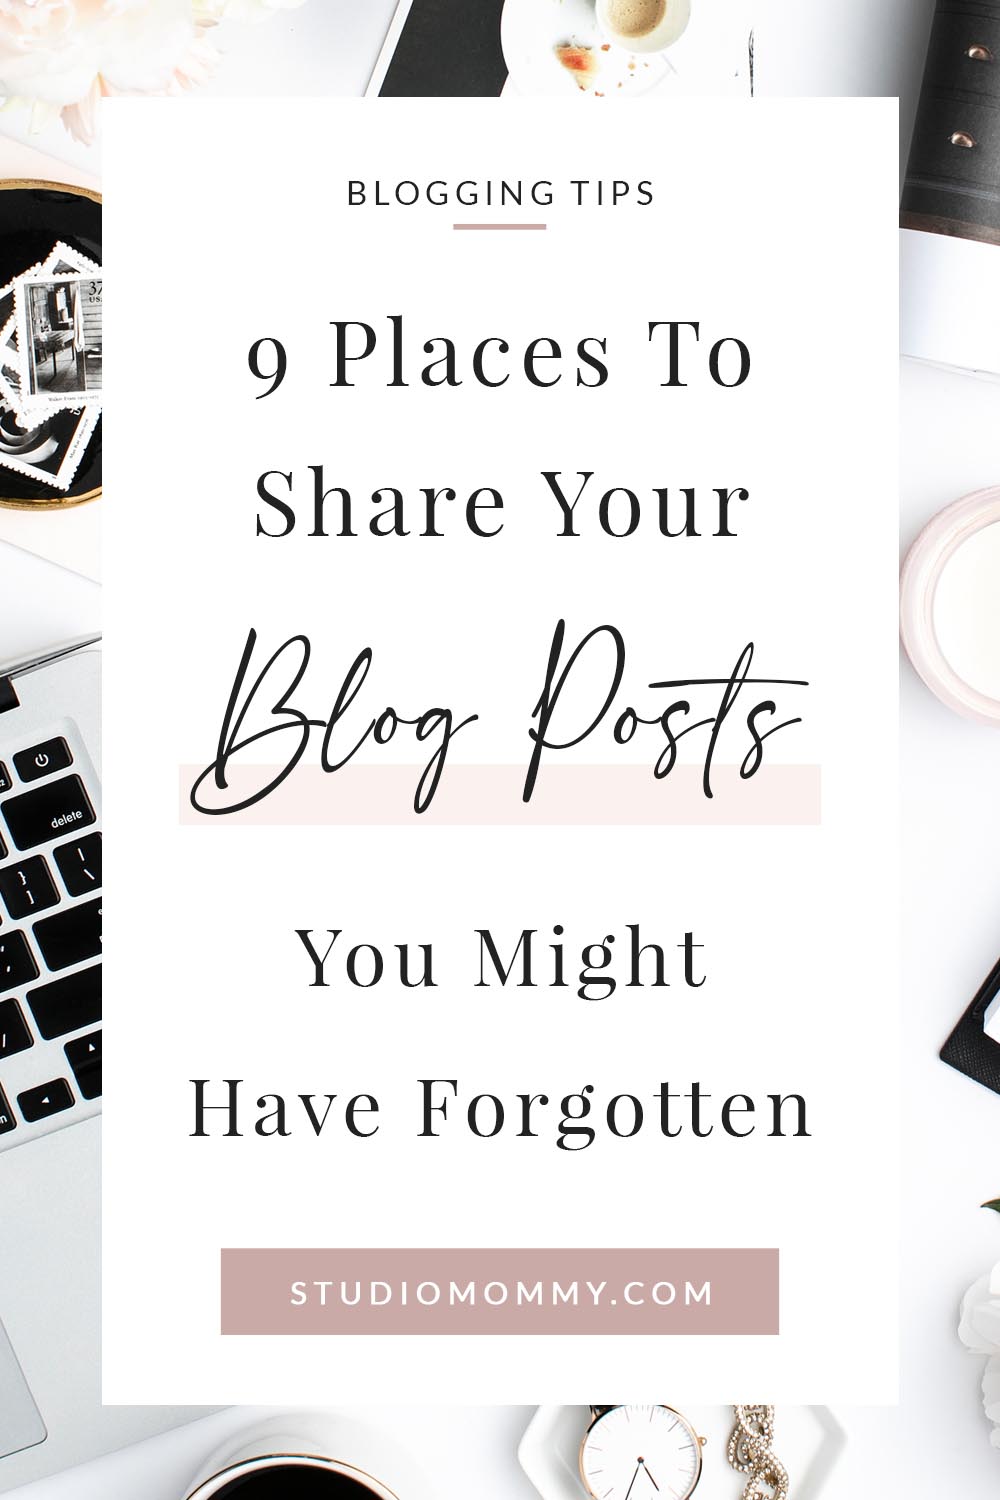 I bet you have read tons of posts about the best places sharing your blog post. And I will bet that social media, Facebook groups and newsletters round the top 5.  But there are other places to share your blog posts. Besides sharing your blog post on social media and other usual places, I’ve got ten places that might not have crossed your mind.  Check out these other places to promote your latest blog post. @studiomommy #studiomommy